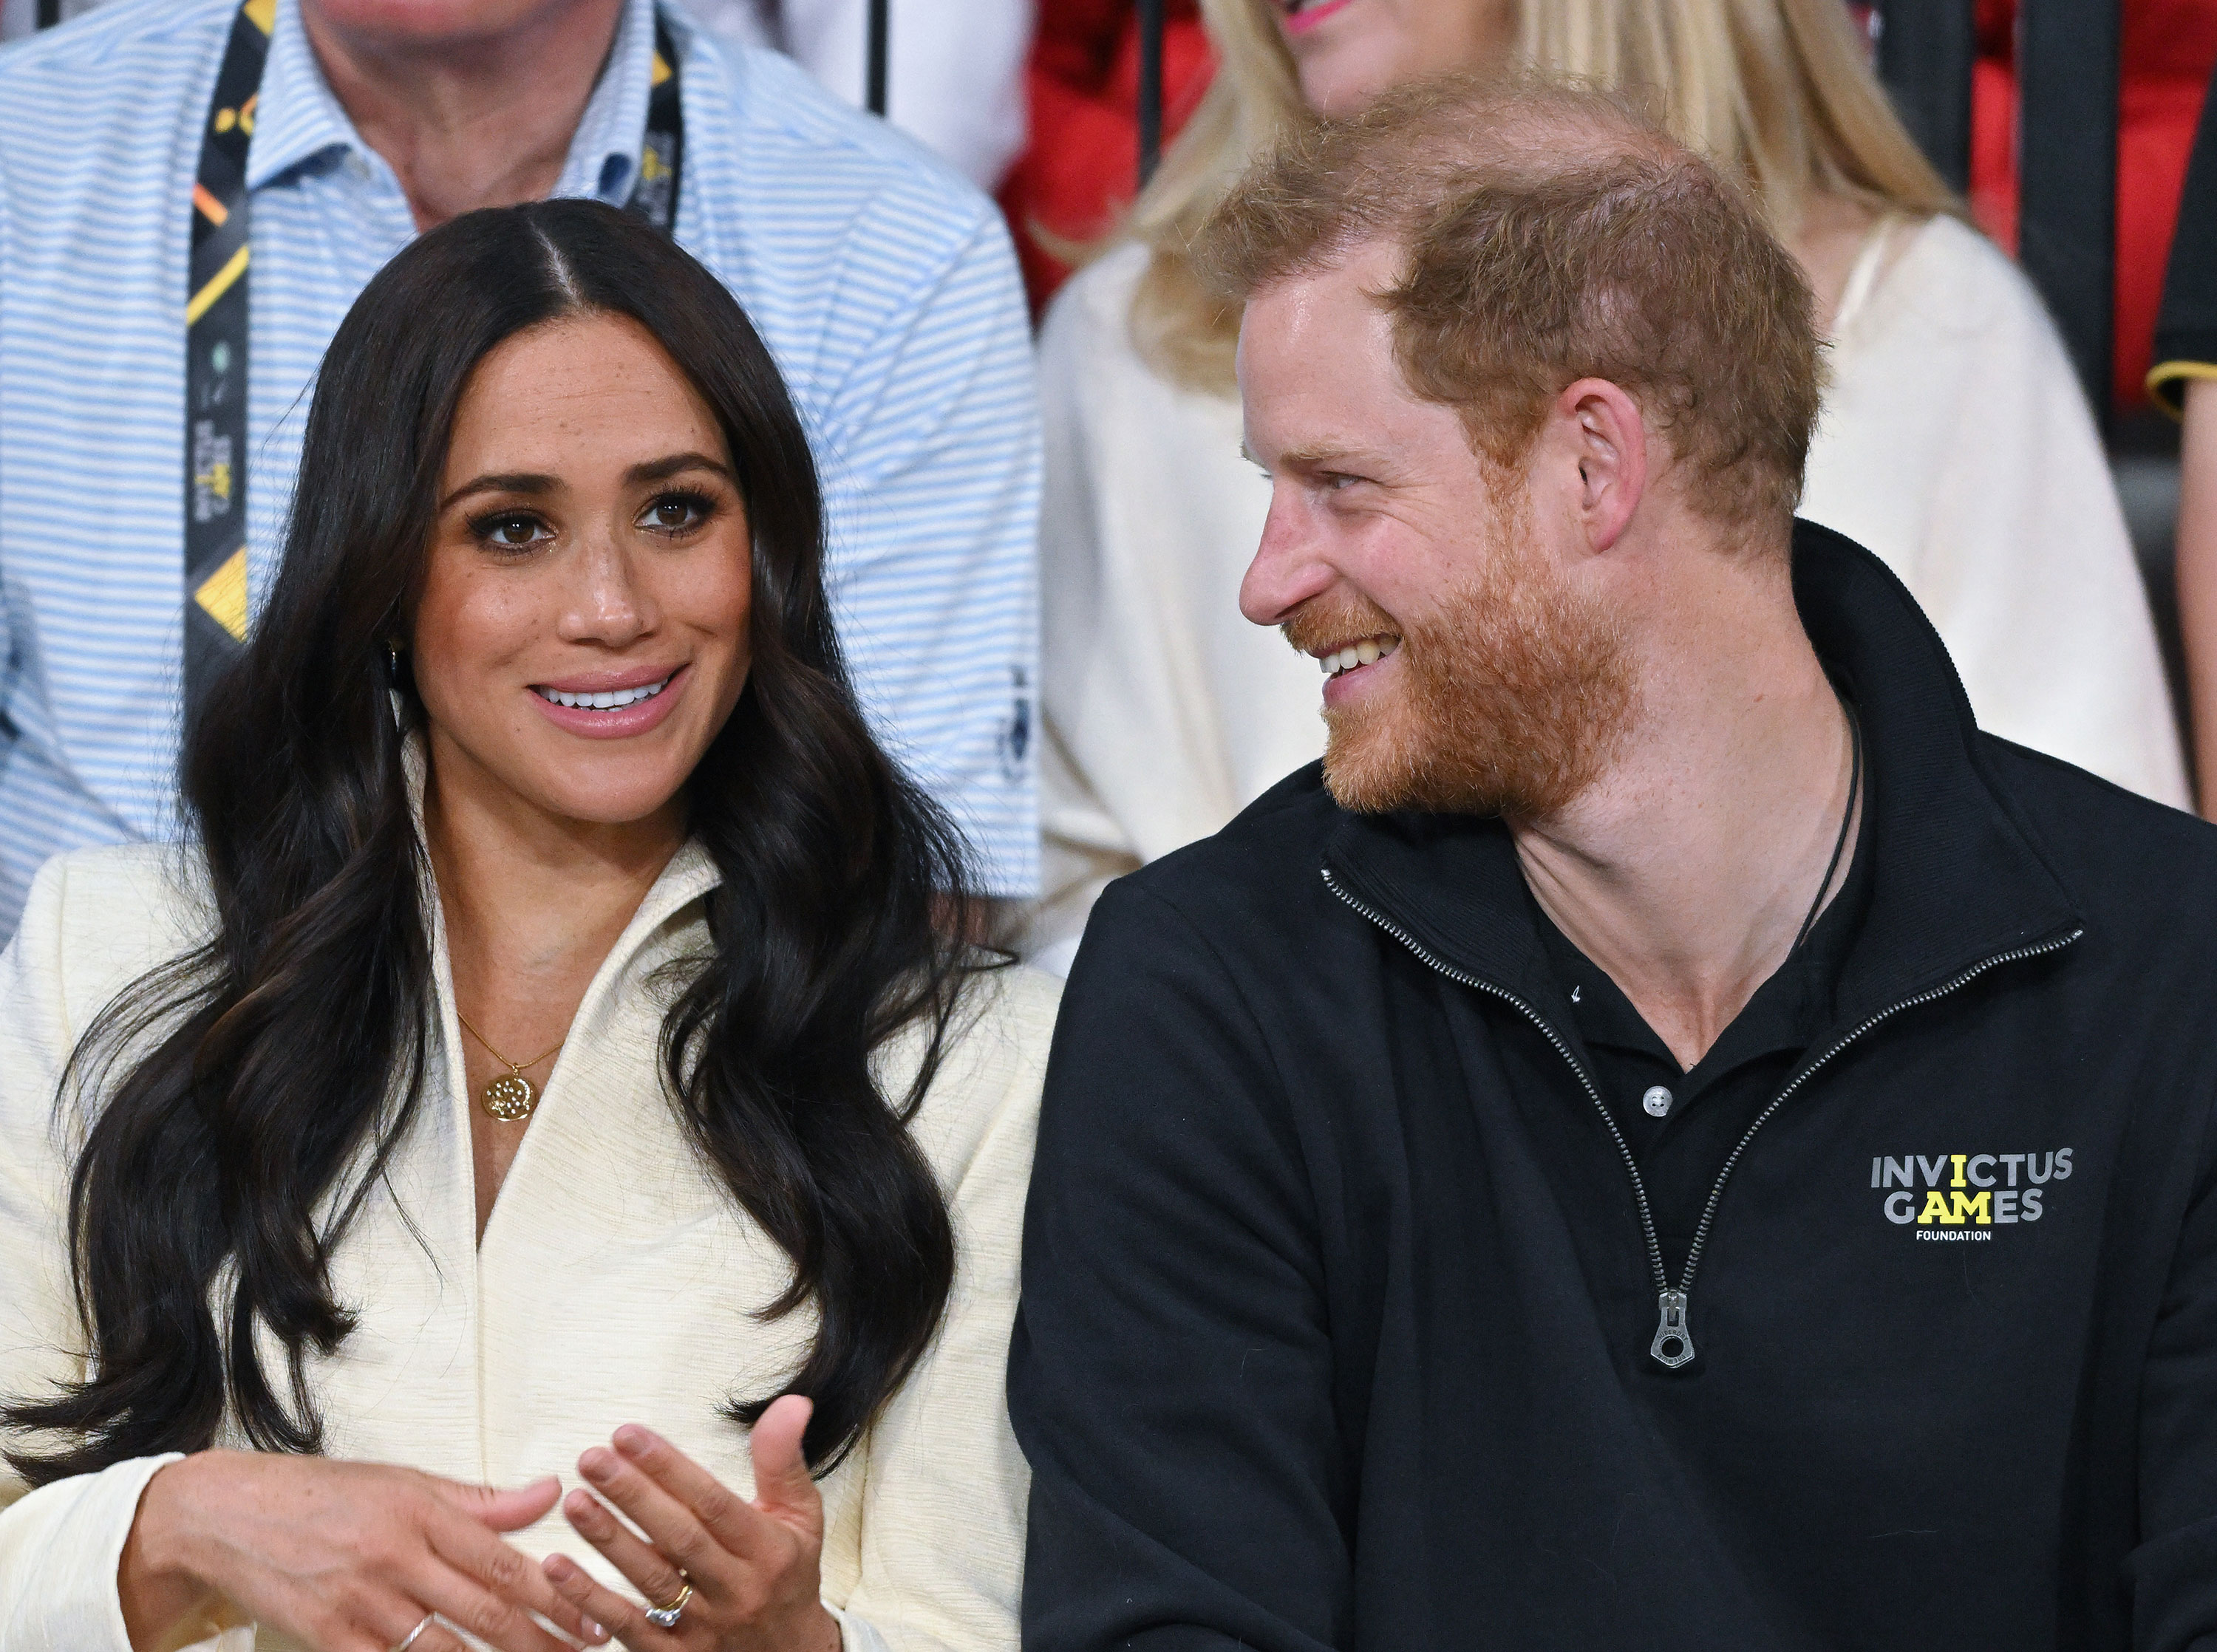 Prince Harry, Duke of Sussex and Meghan, Duchess of Sussex attend the Invictus Games in The Hague, Netherlands, in April.